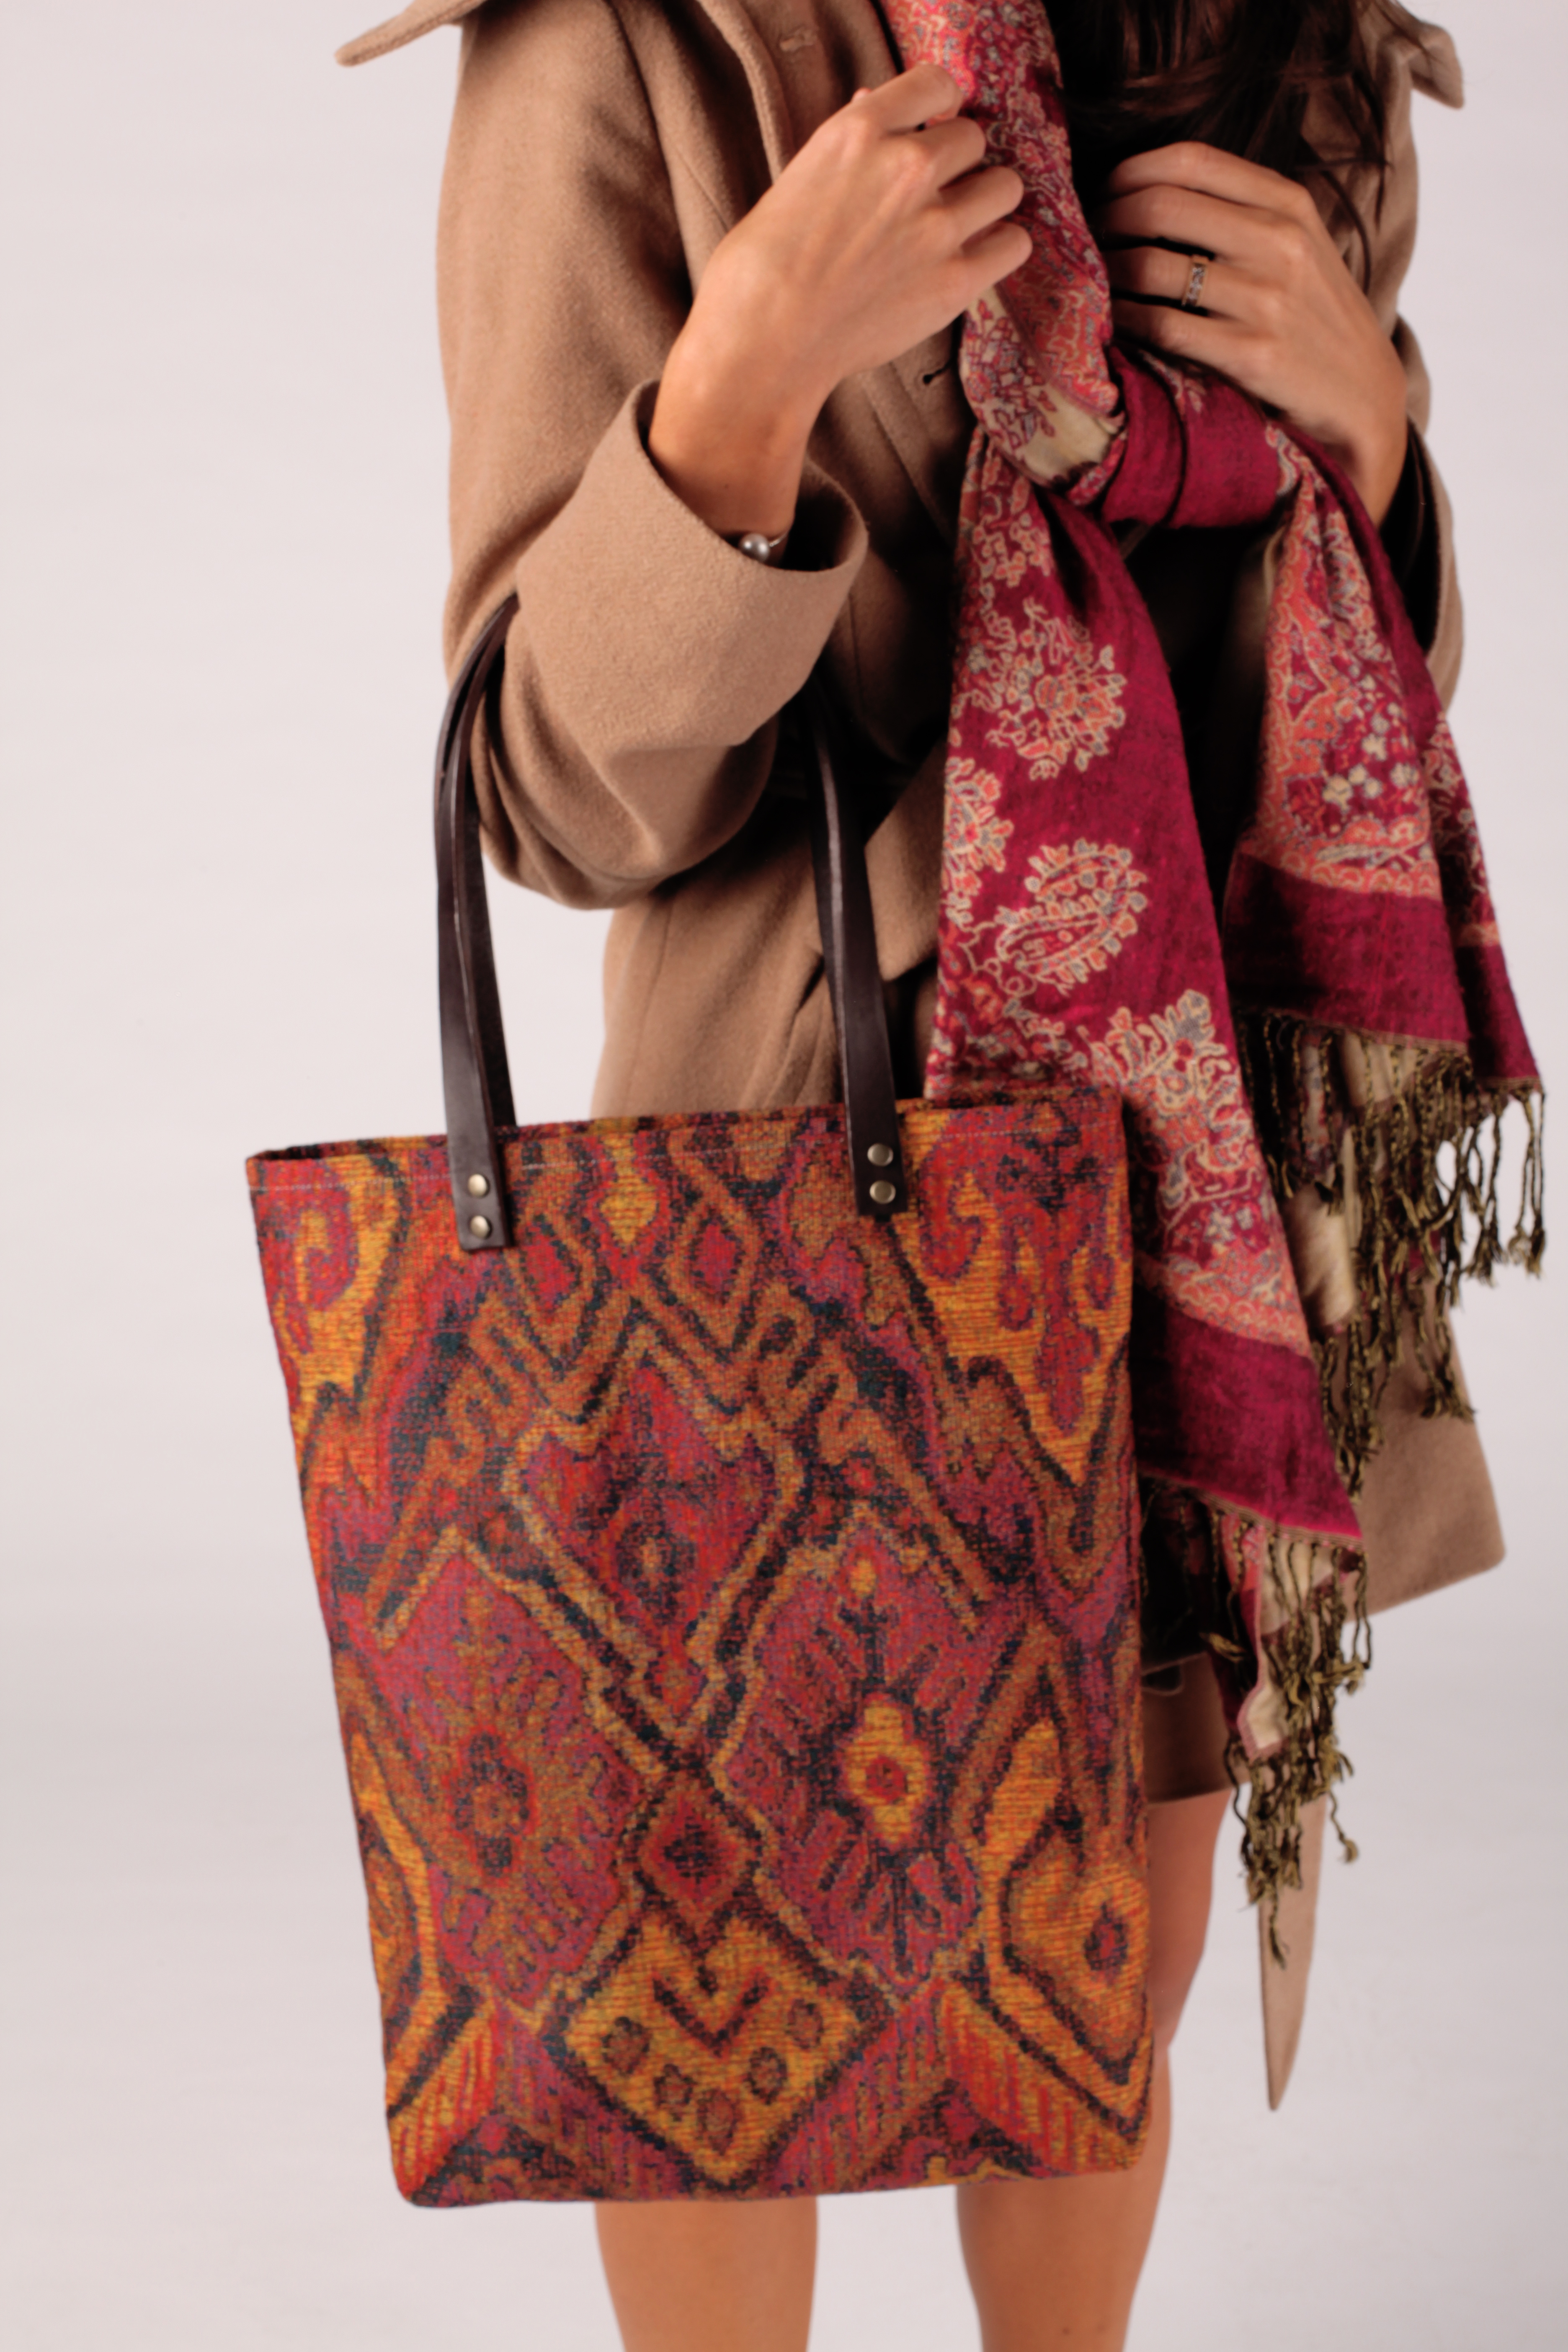 Kilim Canvas Tote Bag with Genuine Leather Straps – Sewing Projects | BurdaStyle.com3744 x 5616